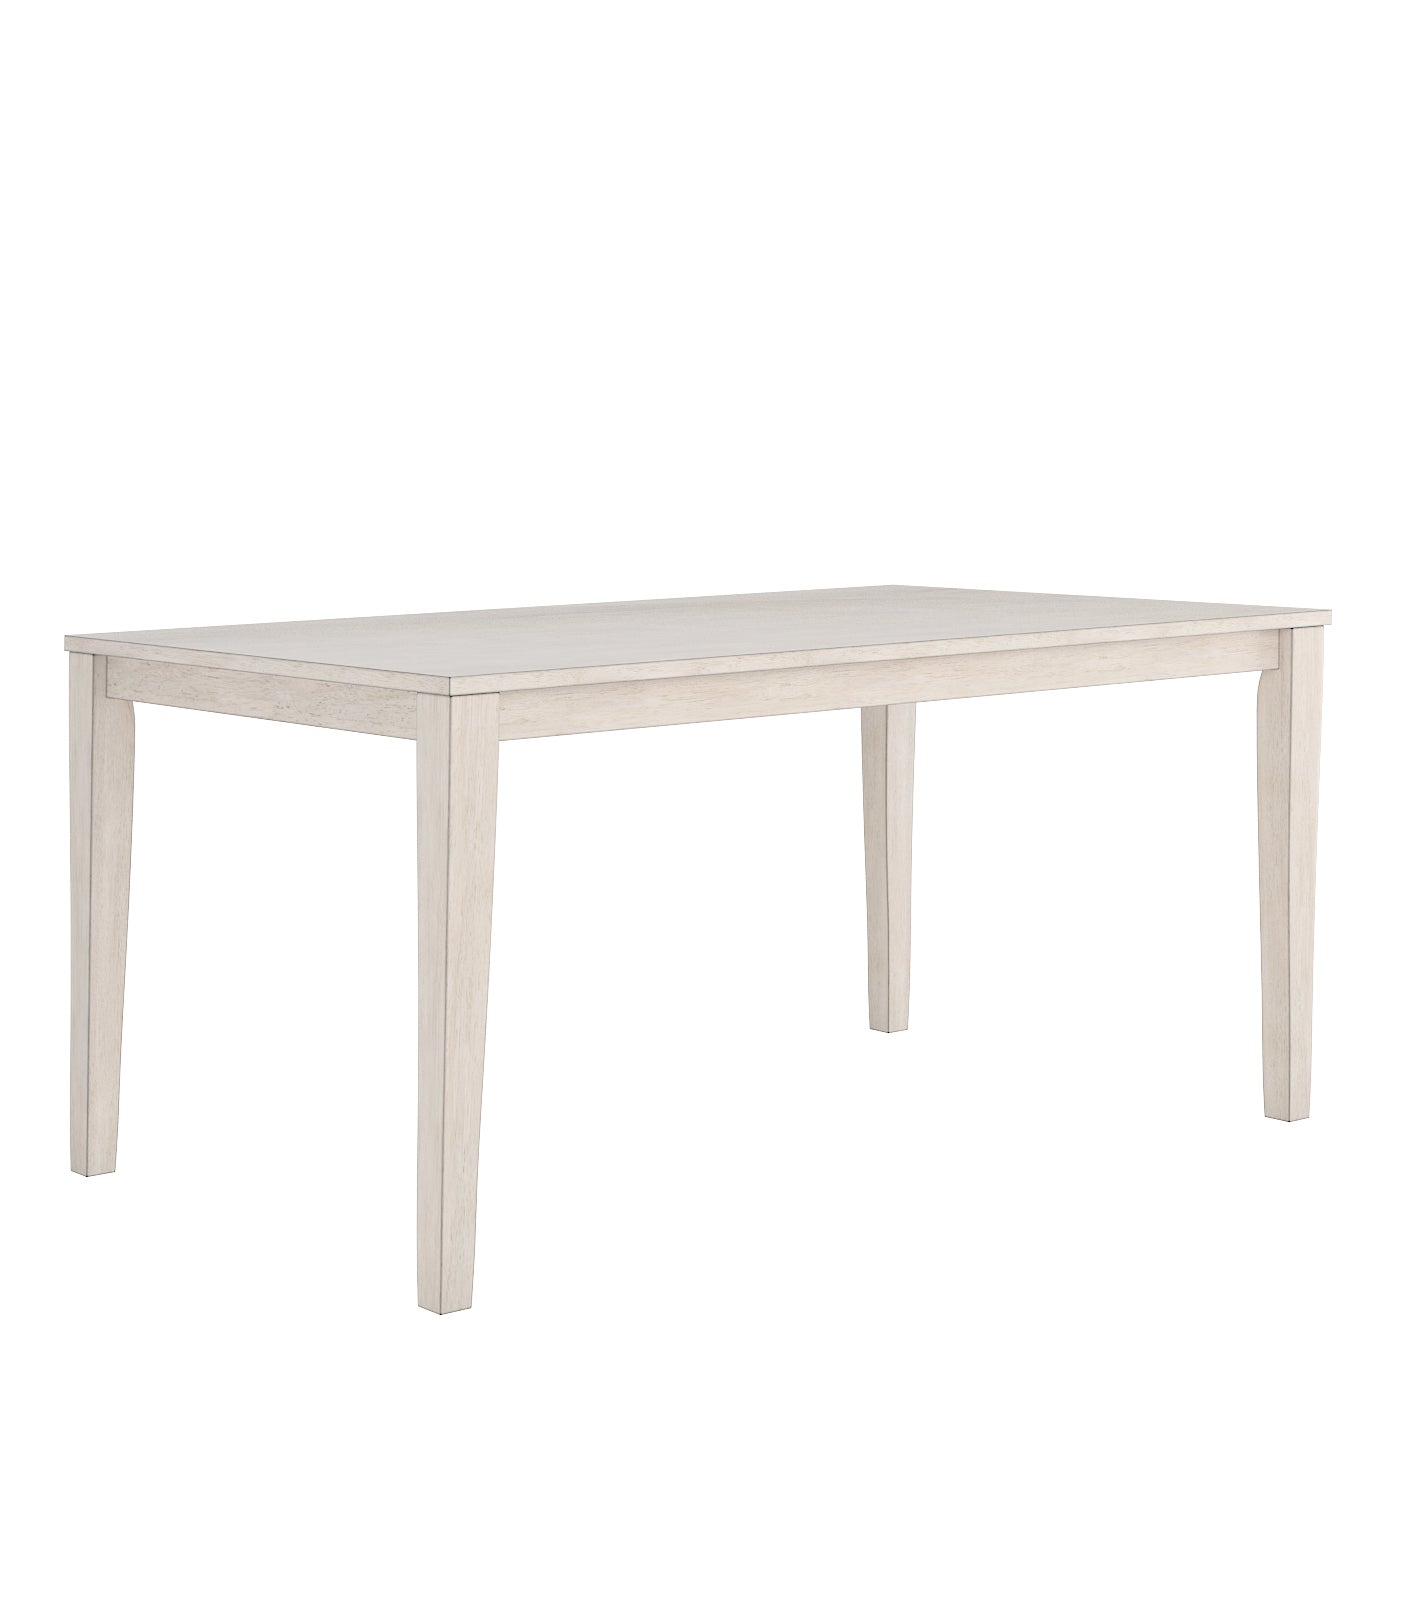 60-inch Rectangular Dining Table - Antique White Finish